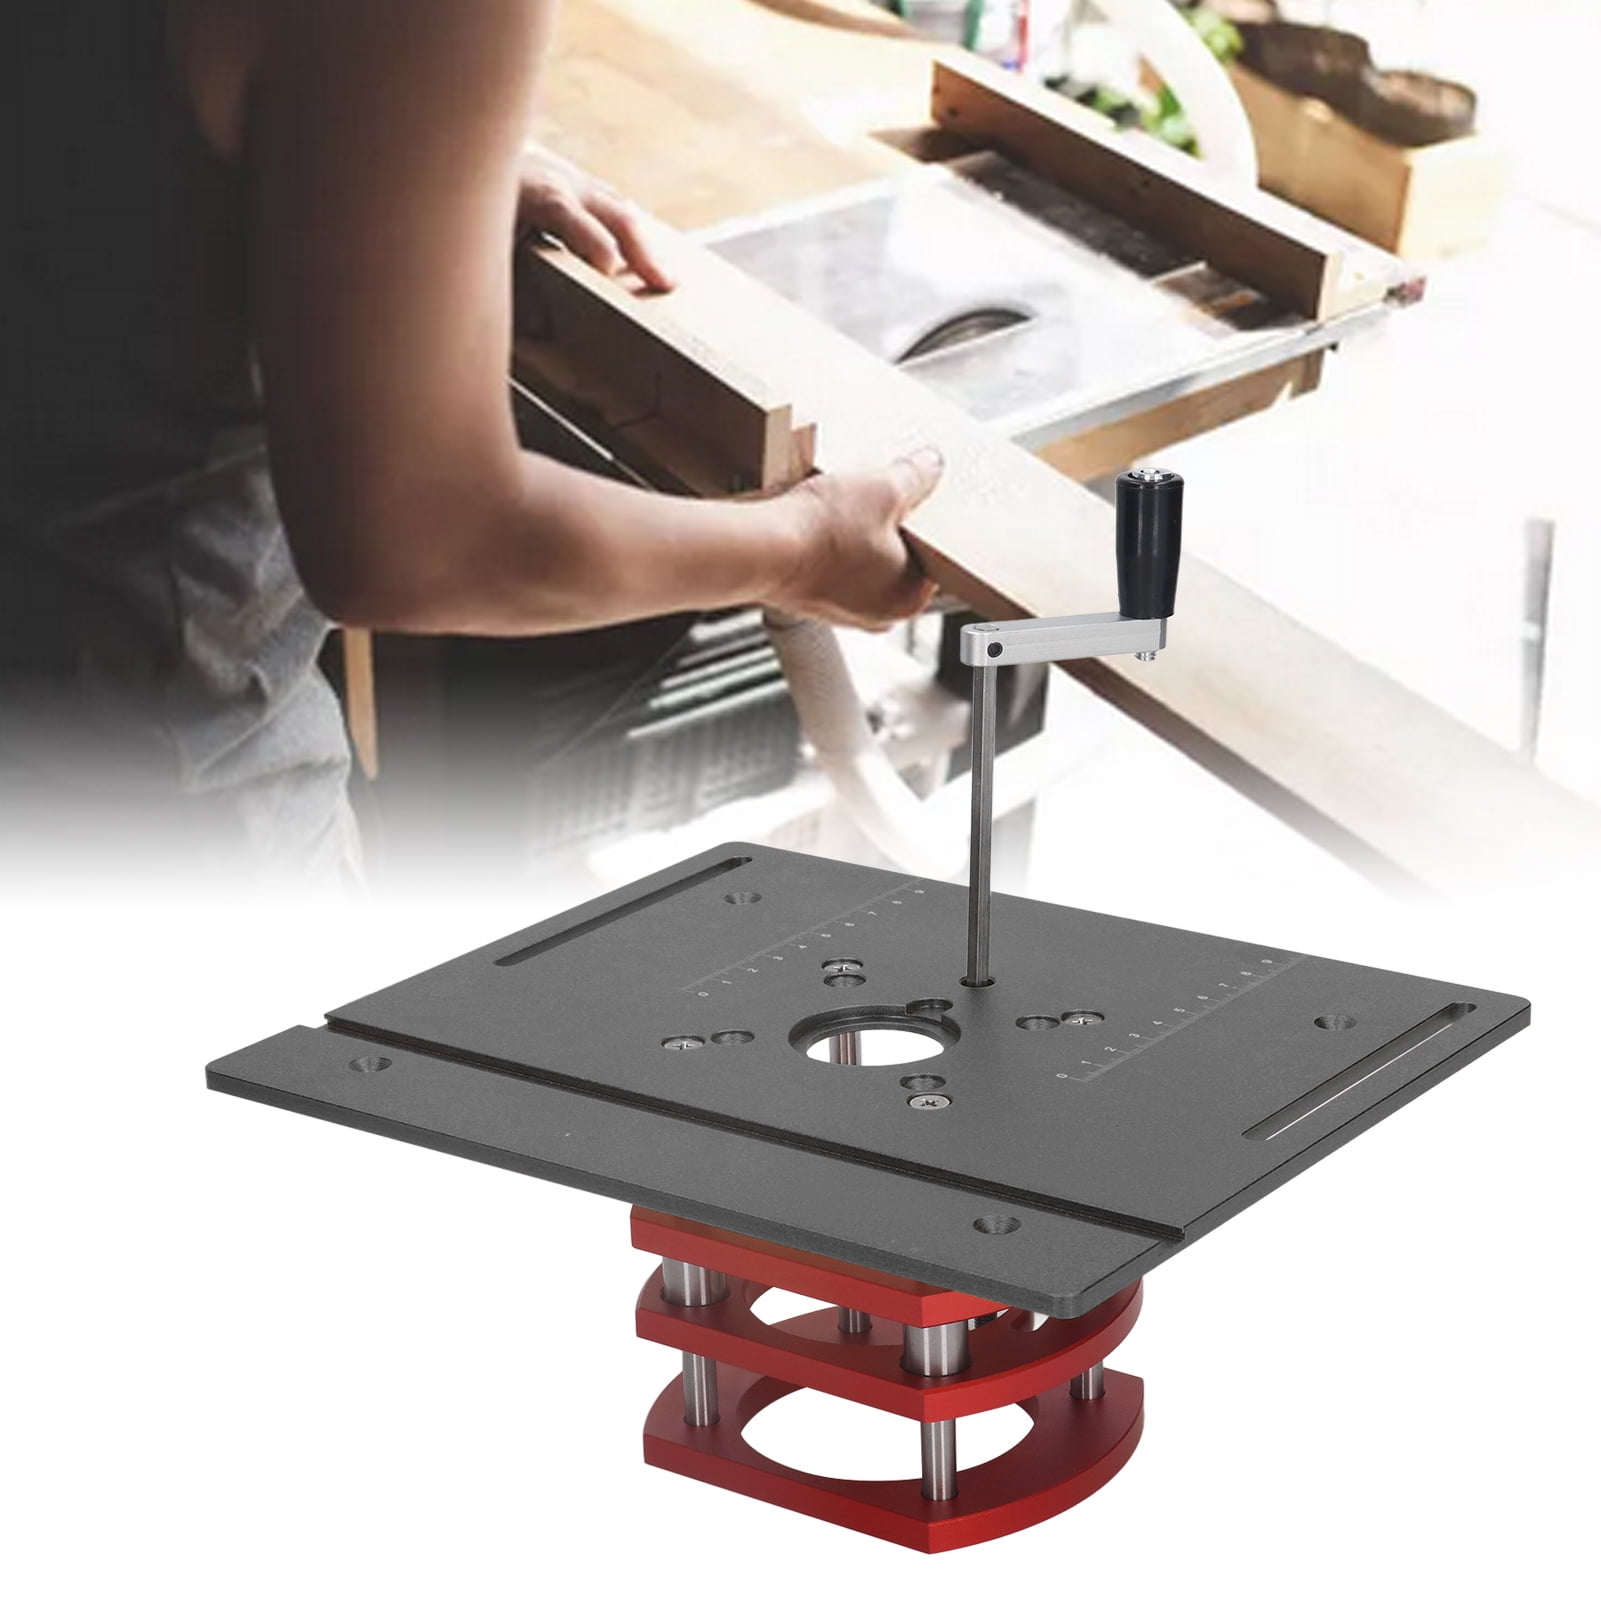 SKIL SRT1039 Benchtop Portable Router Table - 4